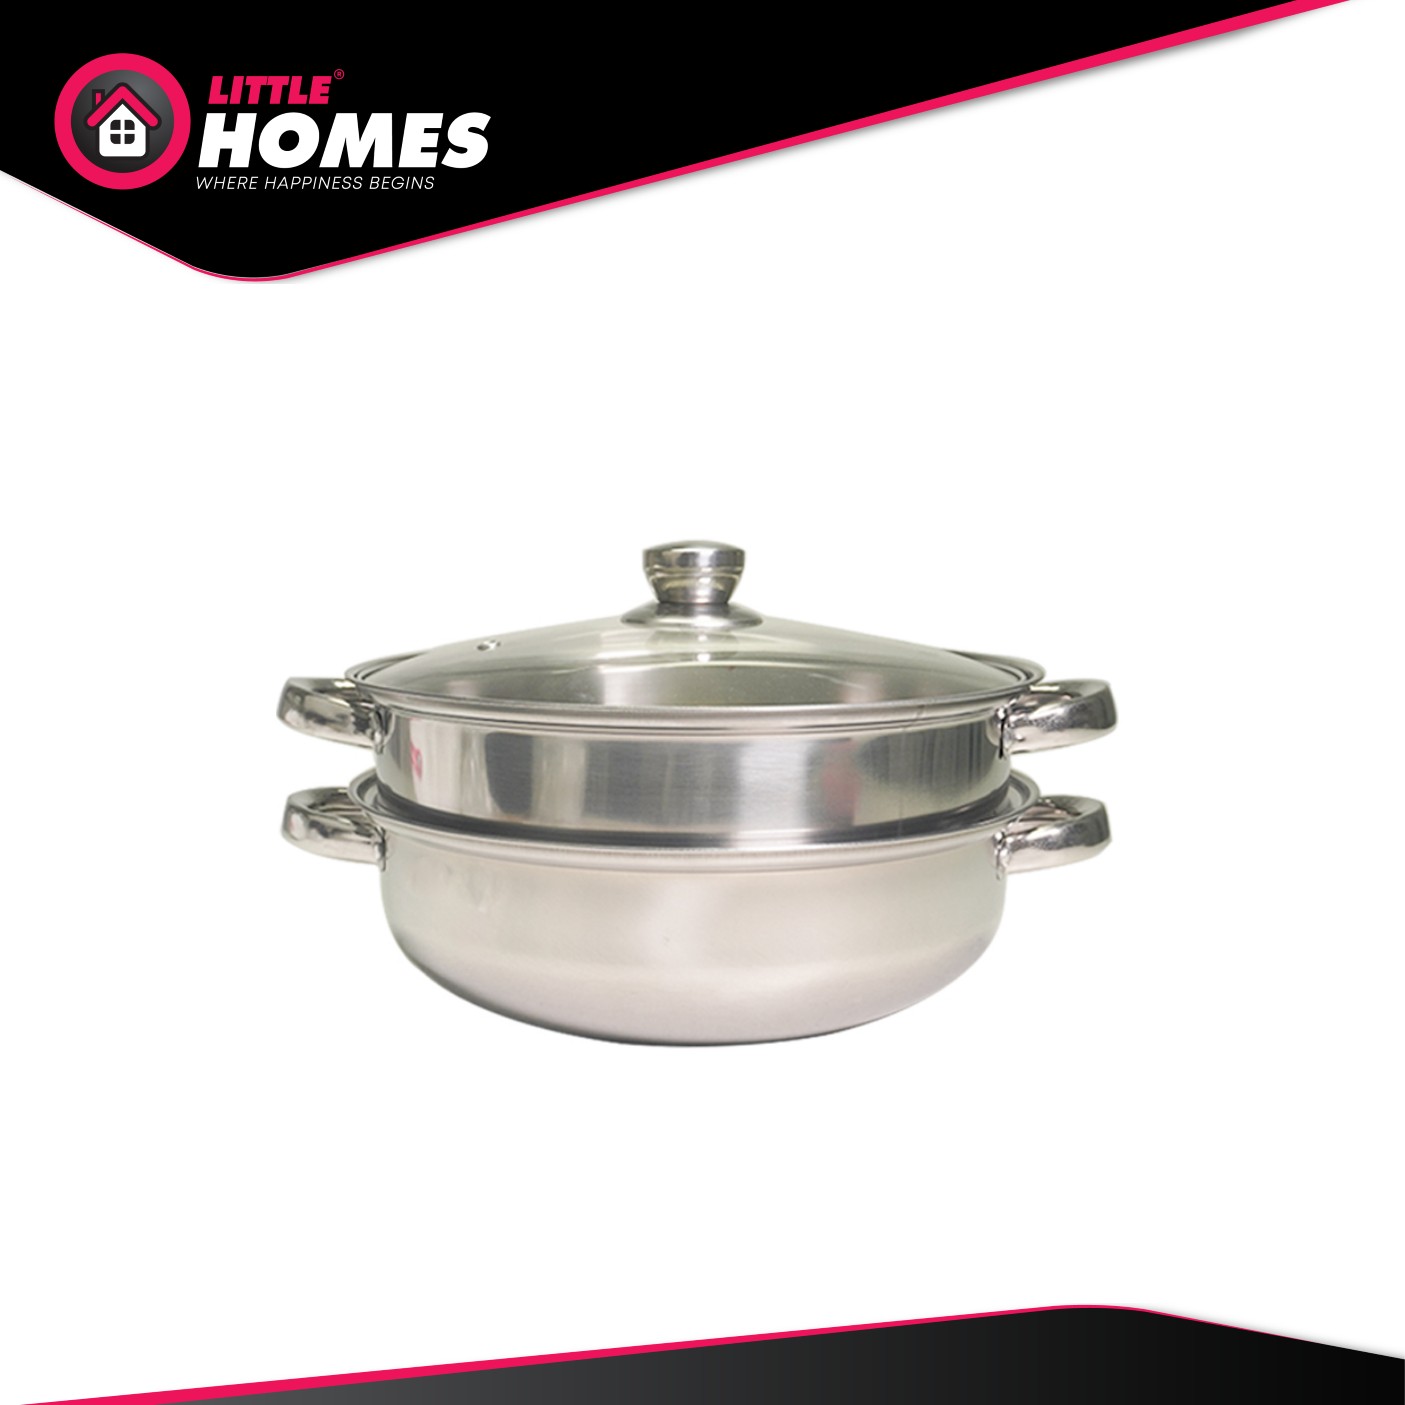 Little Homes Stainless Steel Multi Functional Steamer/Steamer Cooking Pot/Induction Hot Pot/Steamboat Pot with Tempered Glass Lid